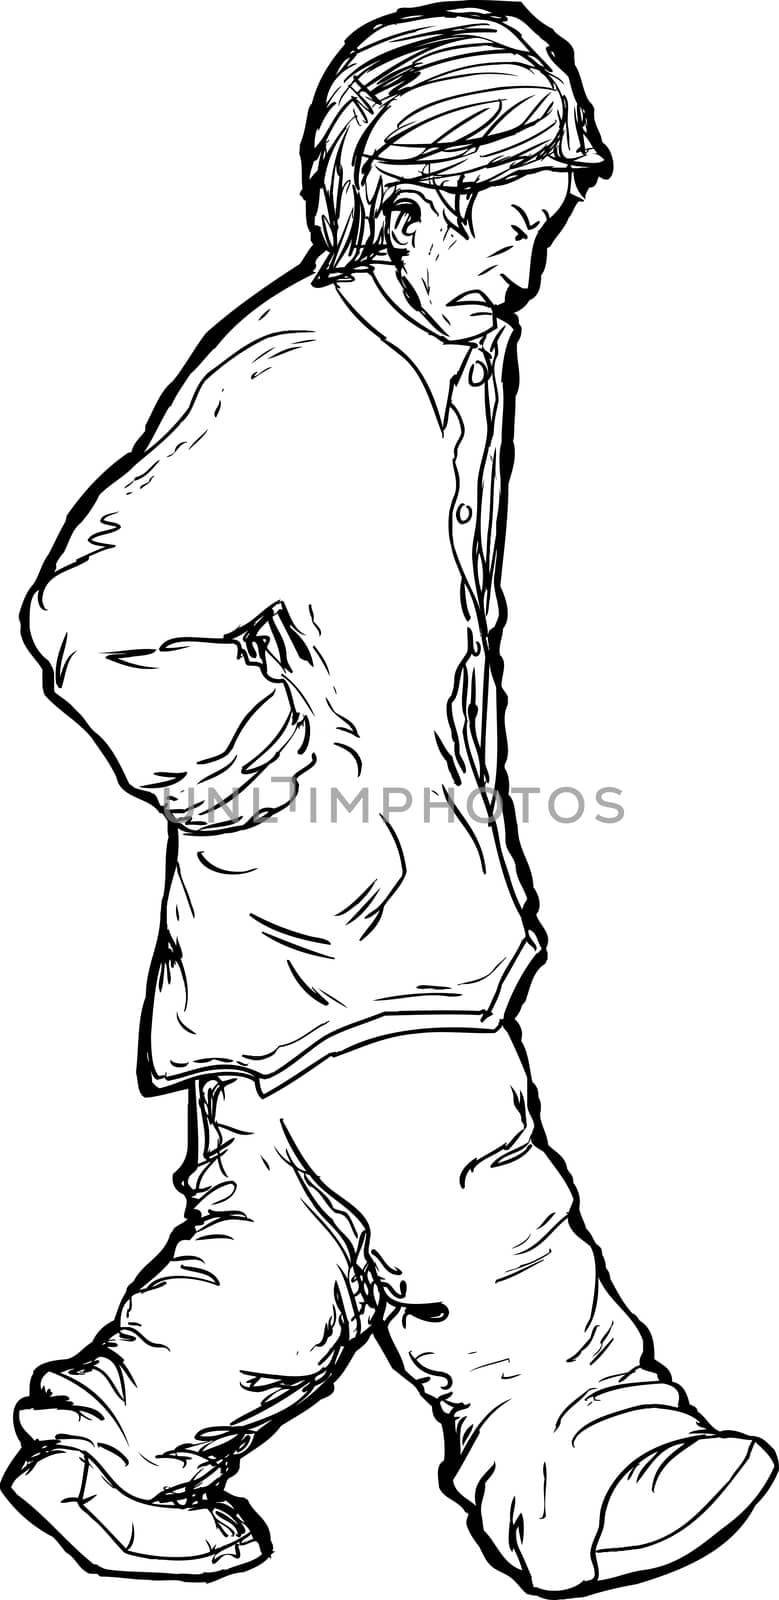 Upset Man Walking Alone Outline by TheBlackRhino